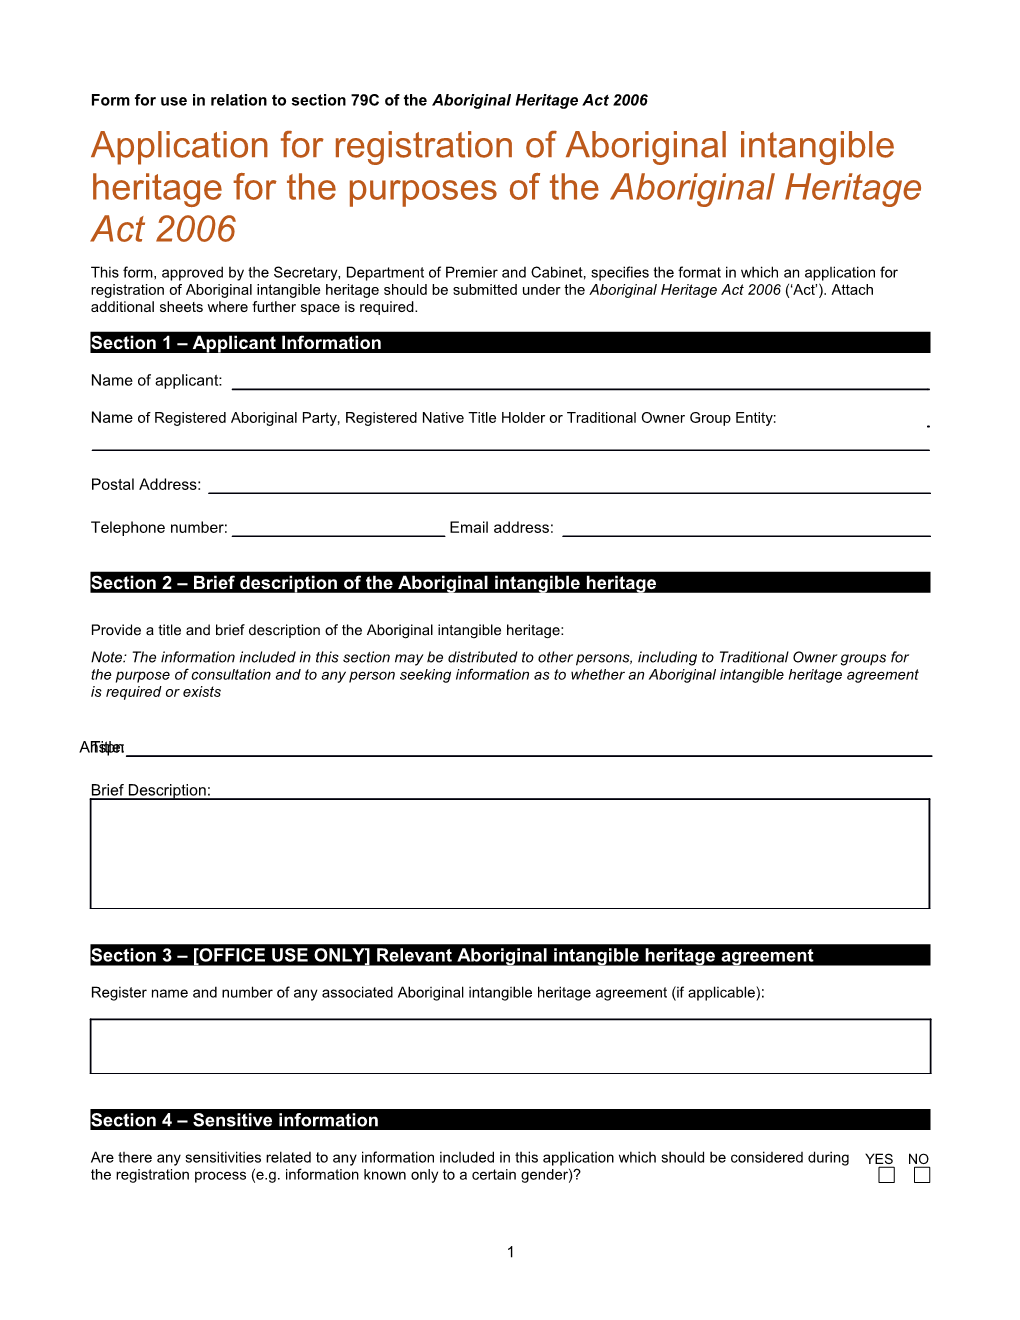 Form for Use in Relation to Section 79C of the Aboriginal Heritage Act 2006